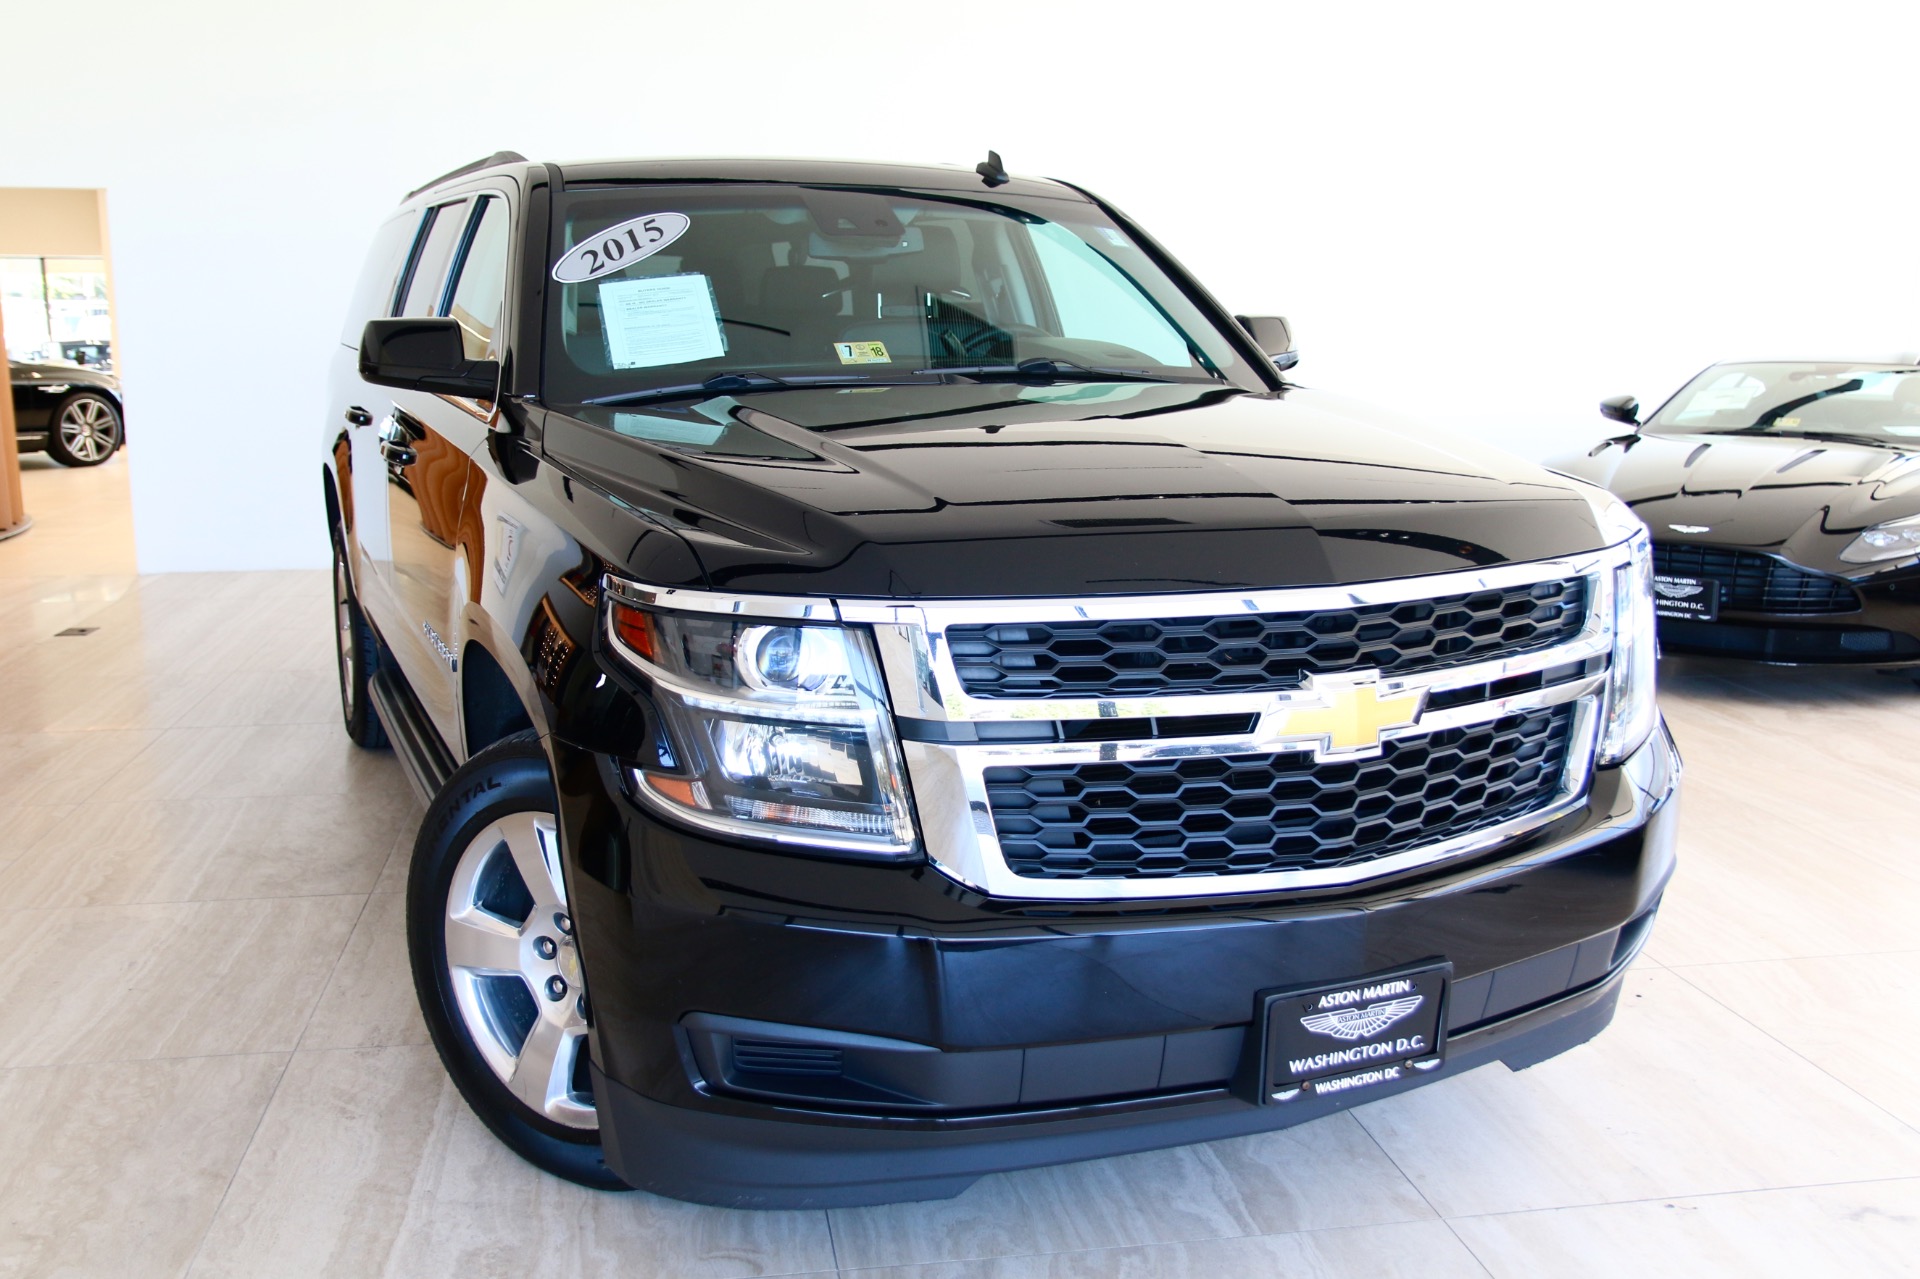 Used 2015 Chevrolet Suburban LT 1500 For Sale (Sold)